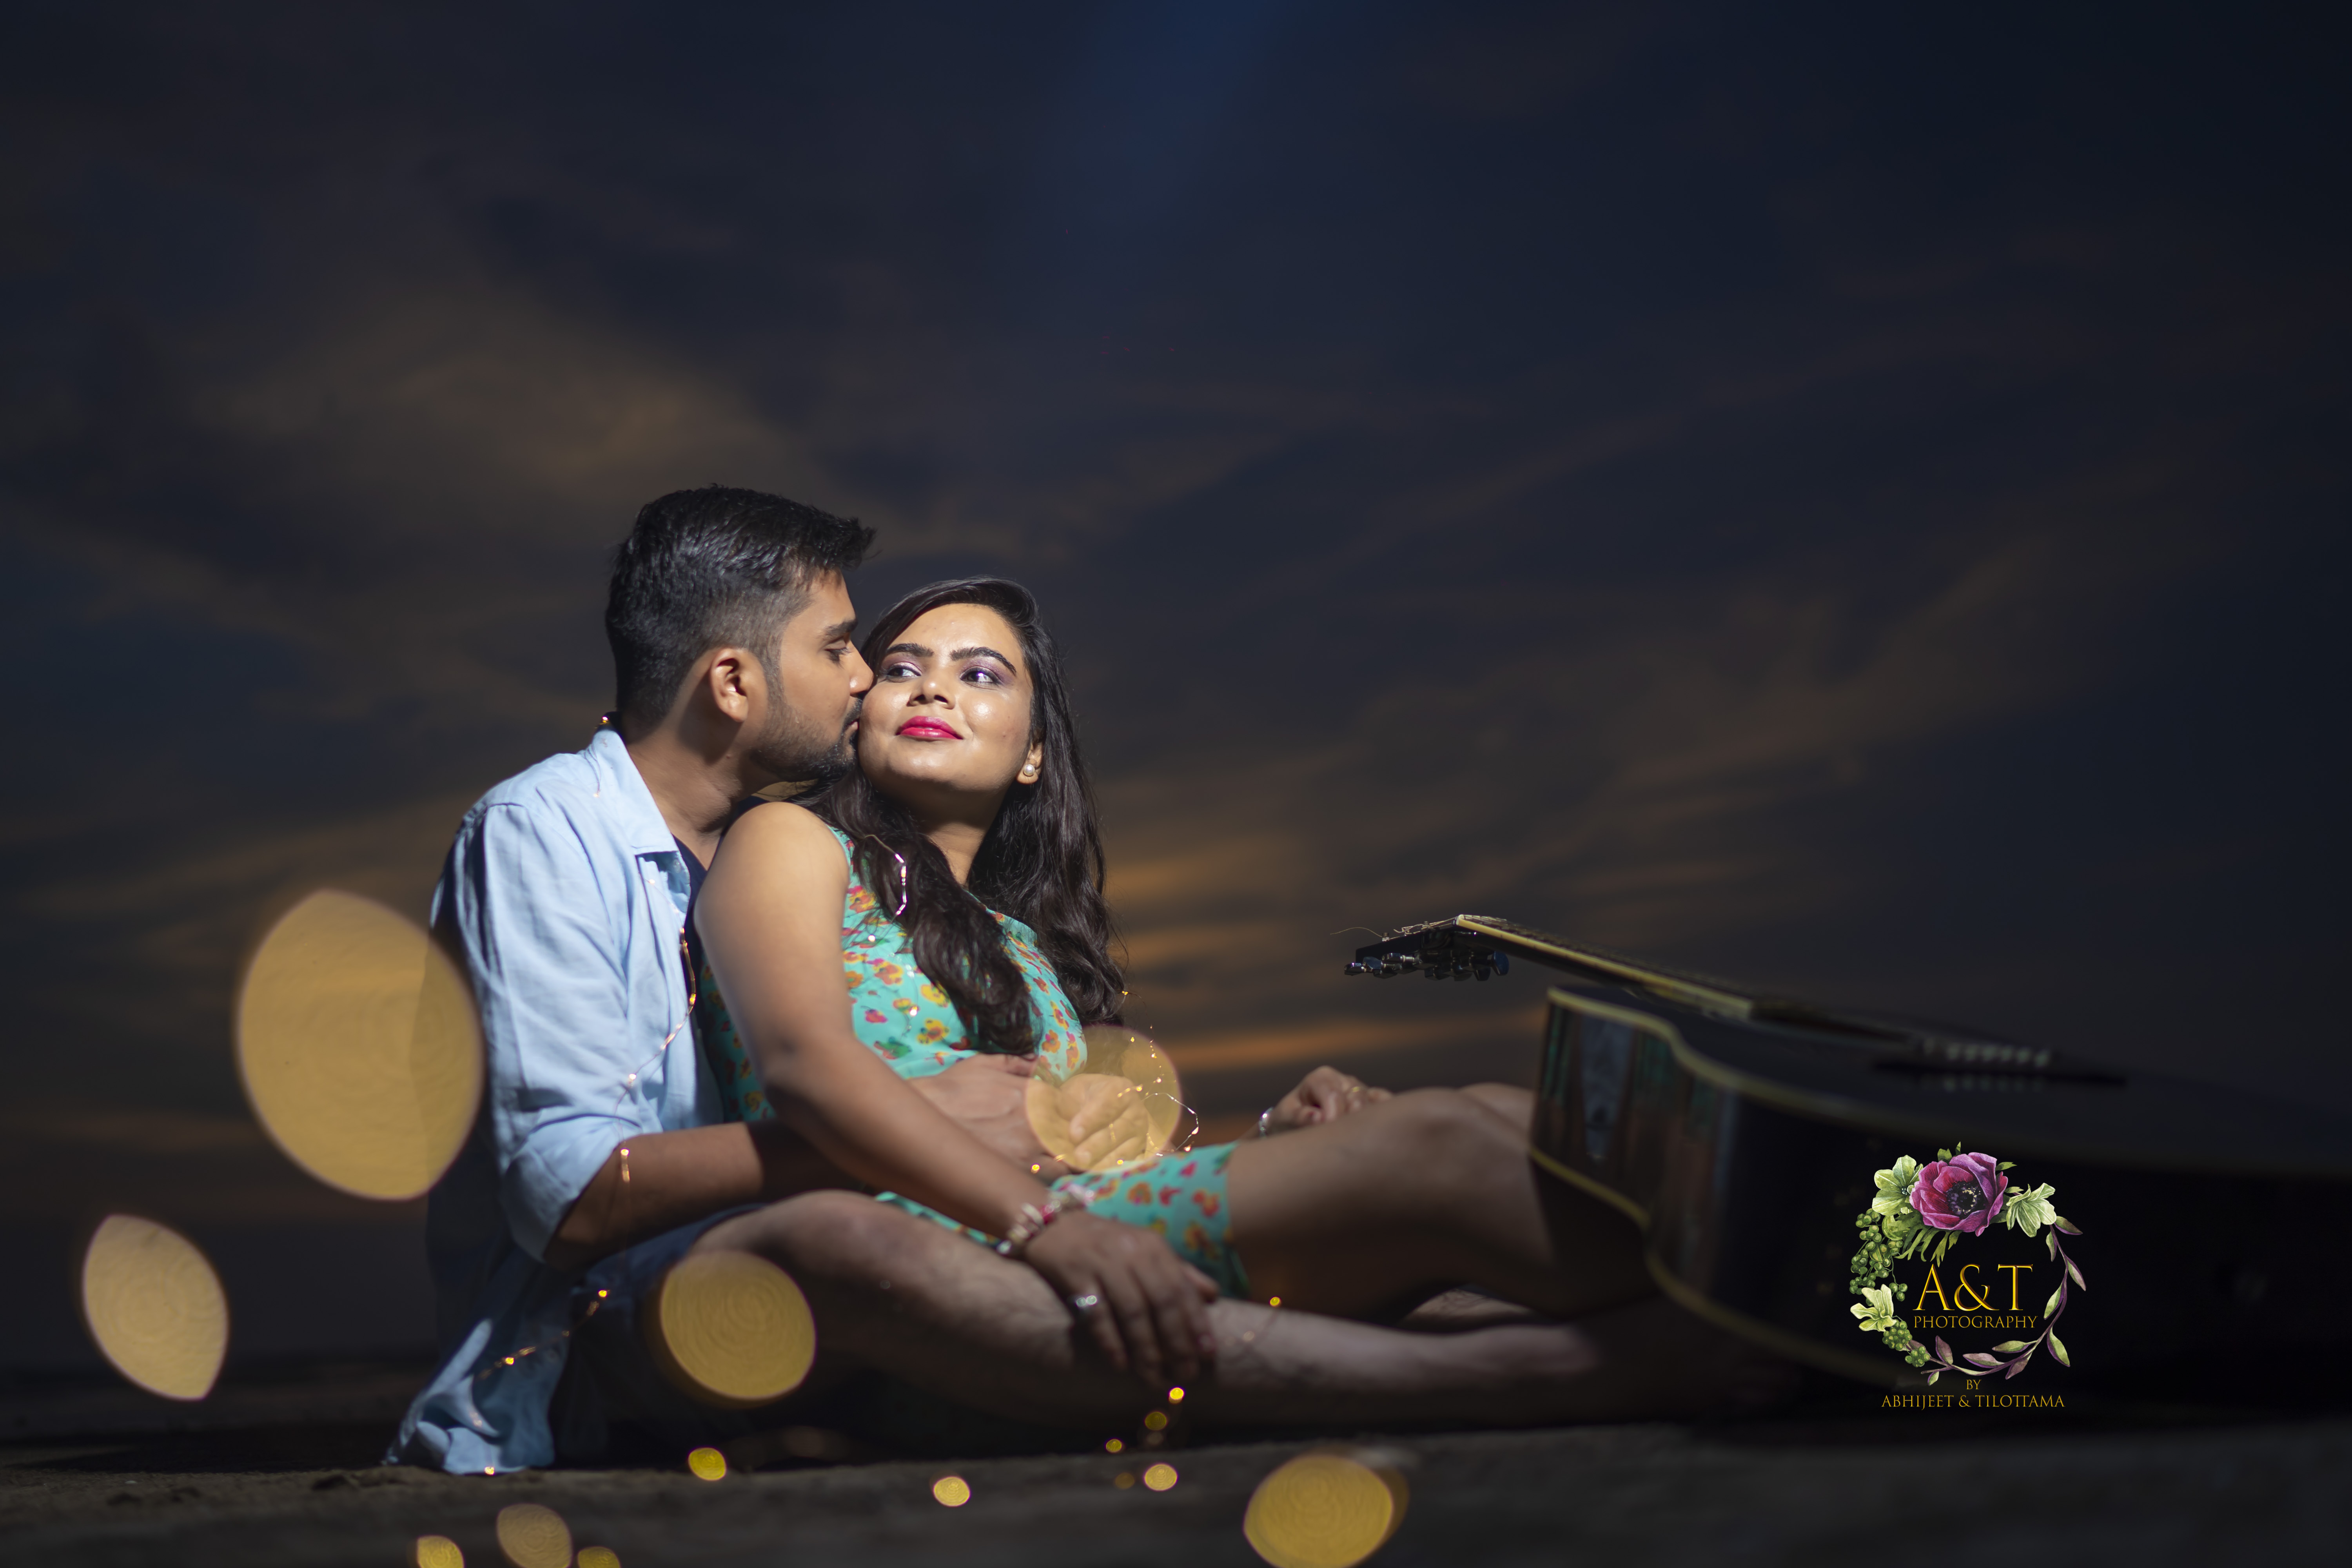 Monil & Vandana's Pre-wedding Photoshoot using amazing probs like fairy tail lights and guitar by best wedding photographer in Pune